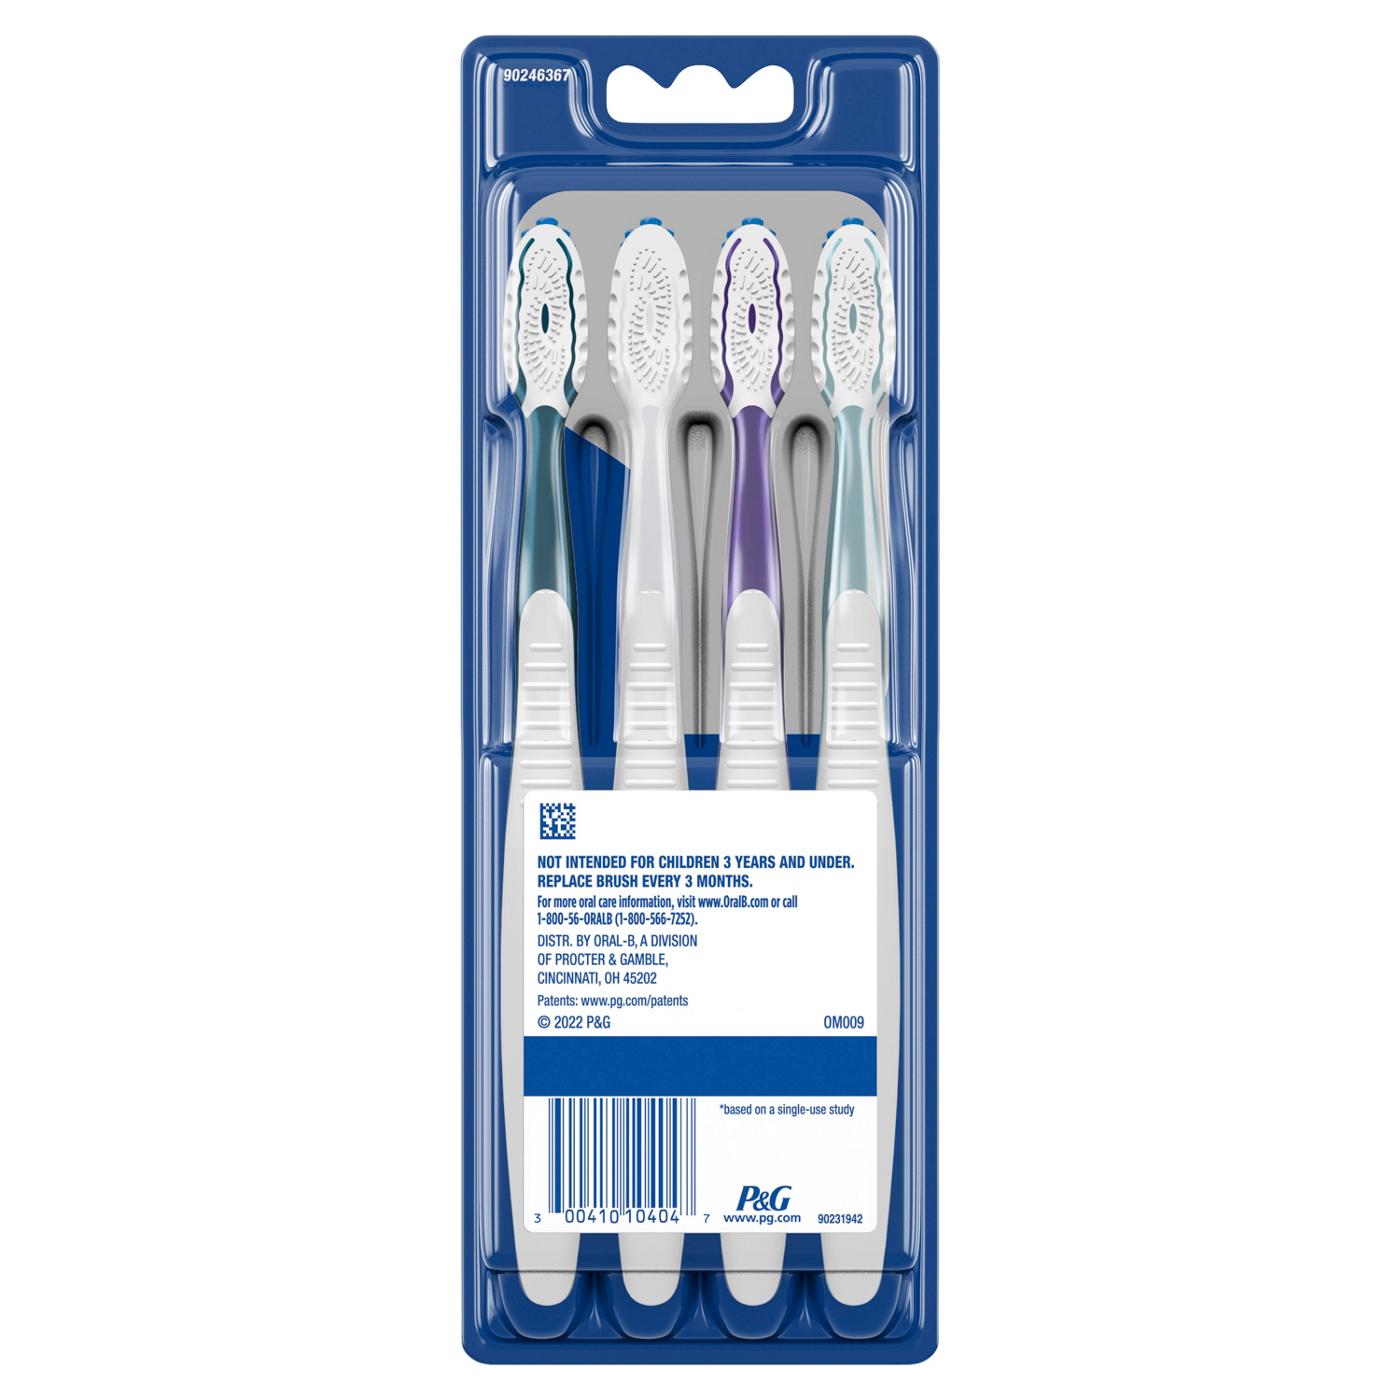 Oral-B Cross Action All In One Toothbrush Value Pack - Soft; image 2 of 10